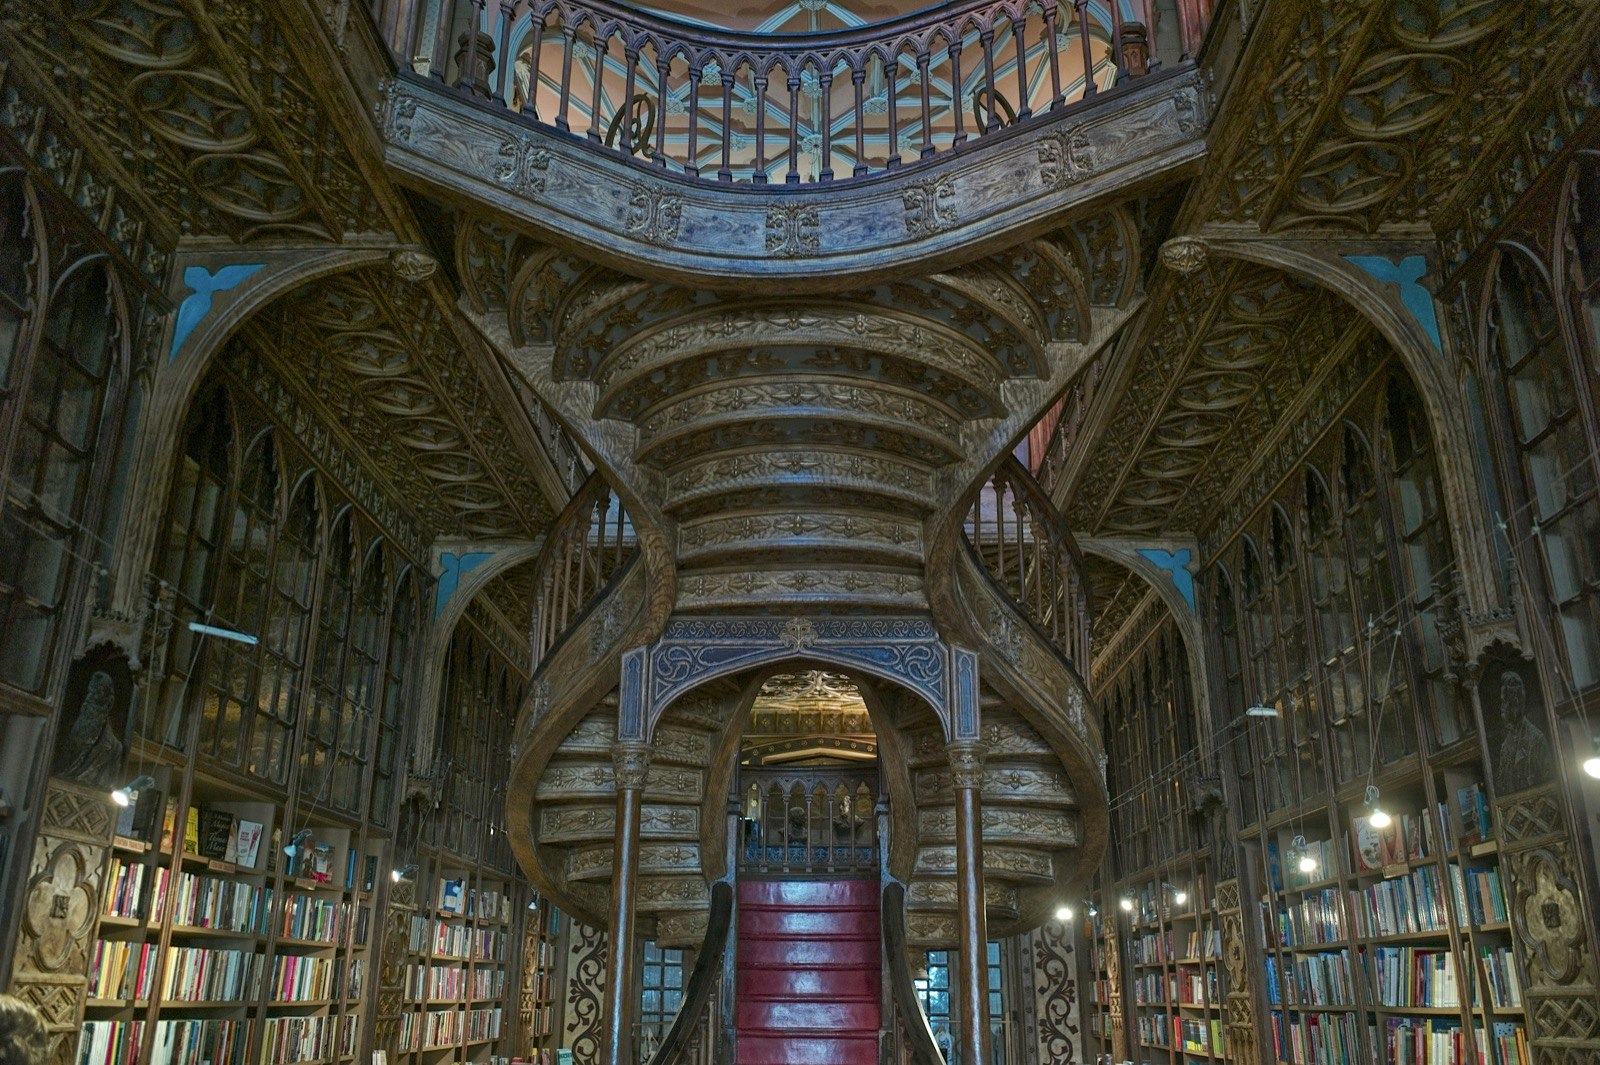 Ornate book shelves and a elegantly carved stair case in a book store in Portugal